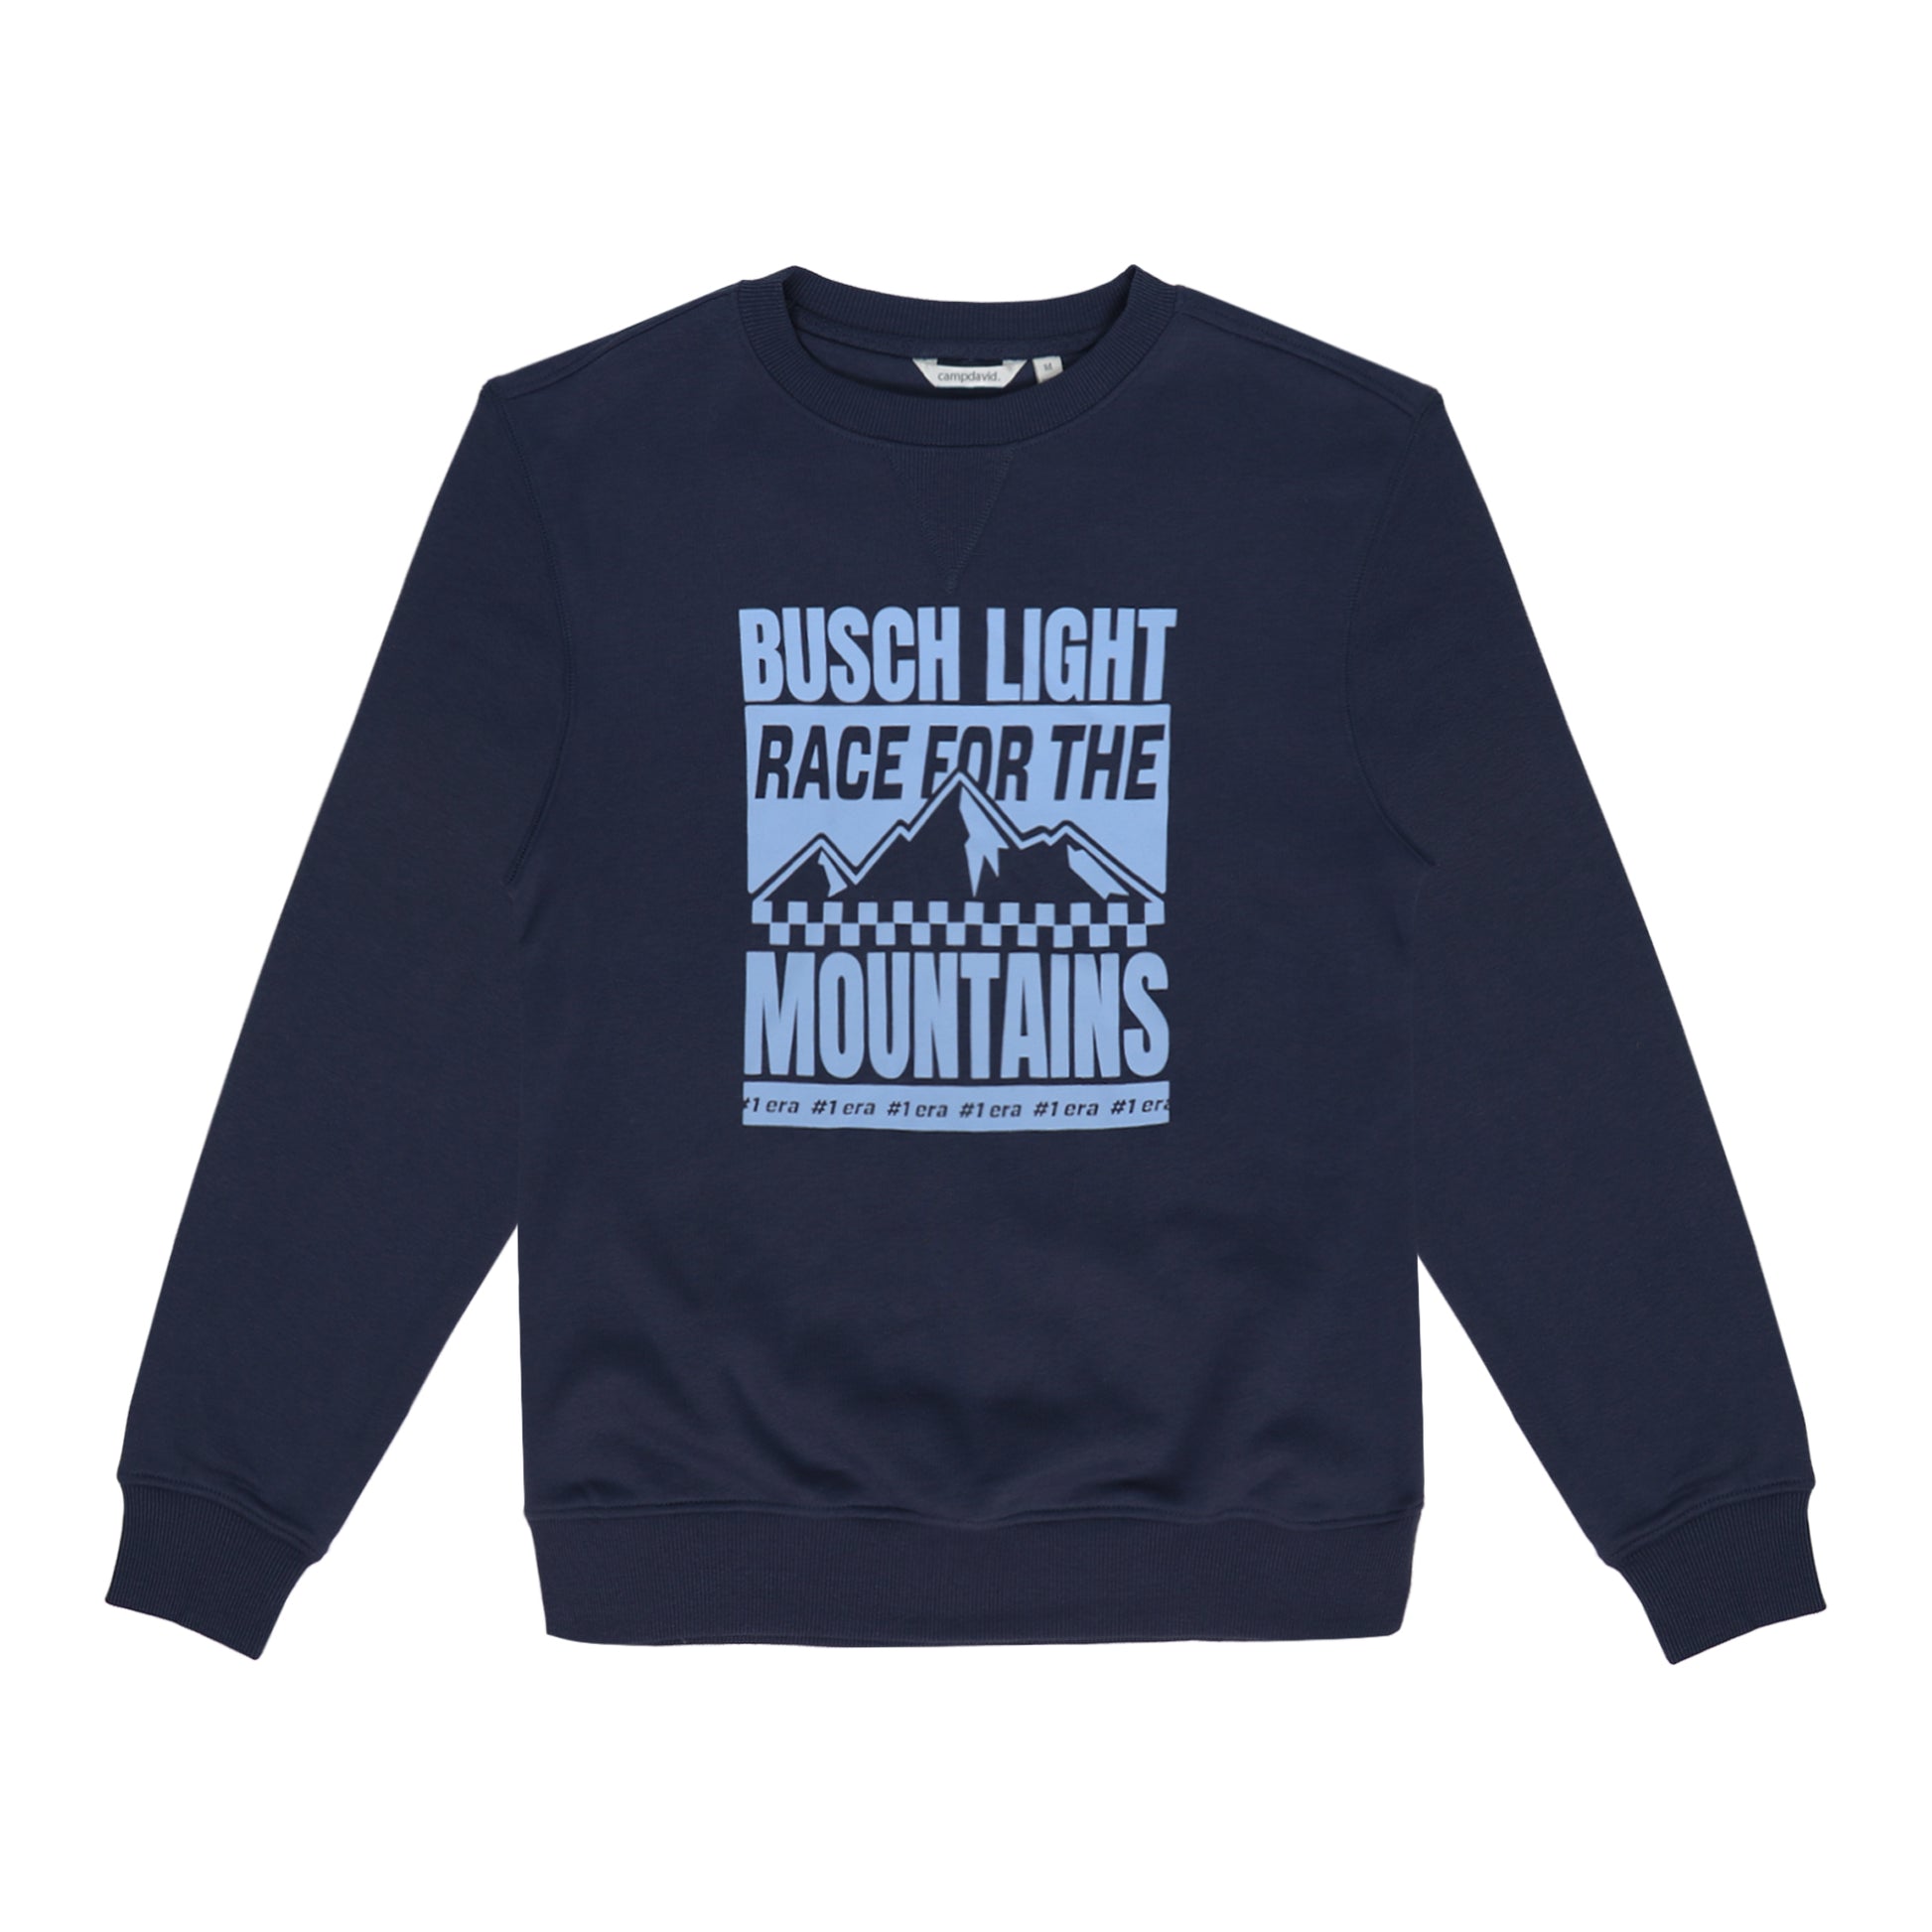 Front view of navy Busch Light Racing Sweatshirt. "Race for the mountains"